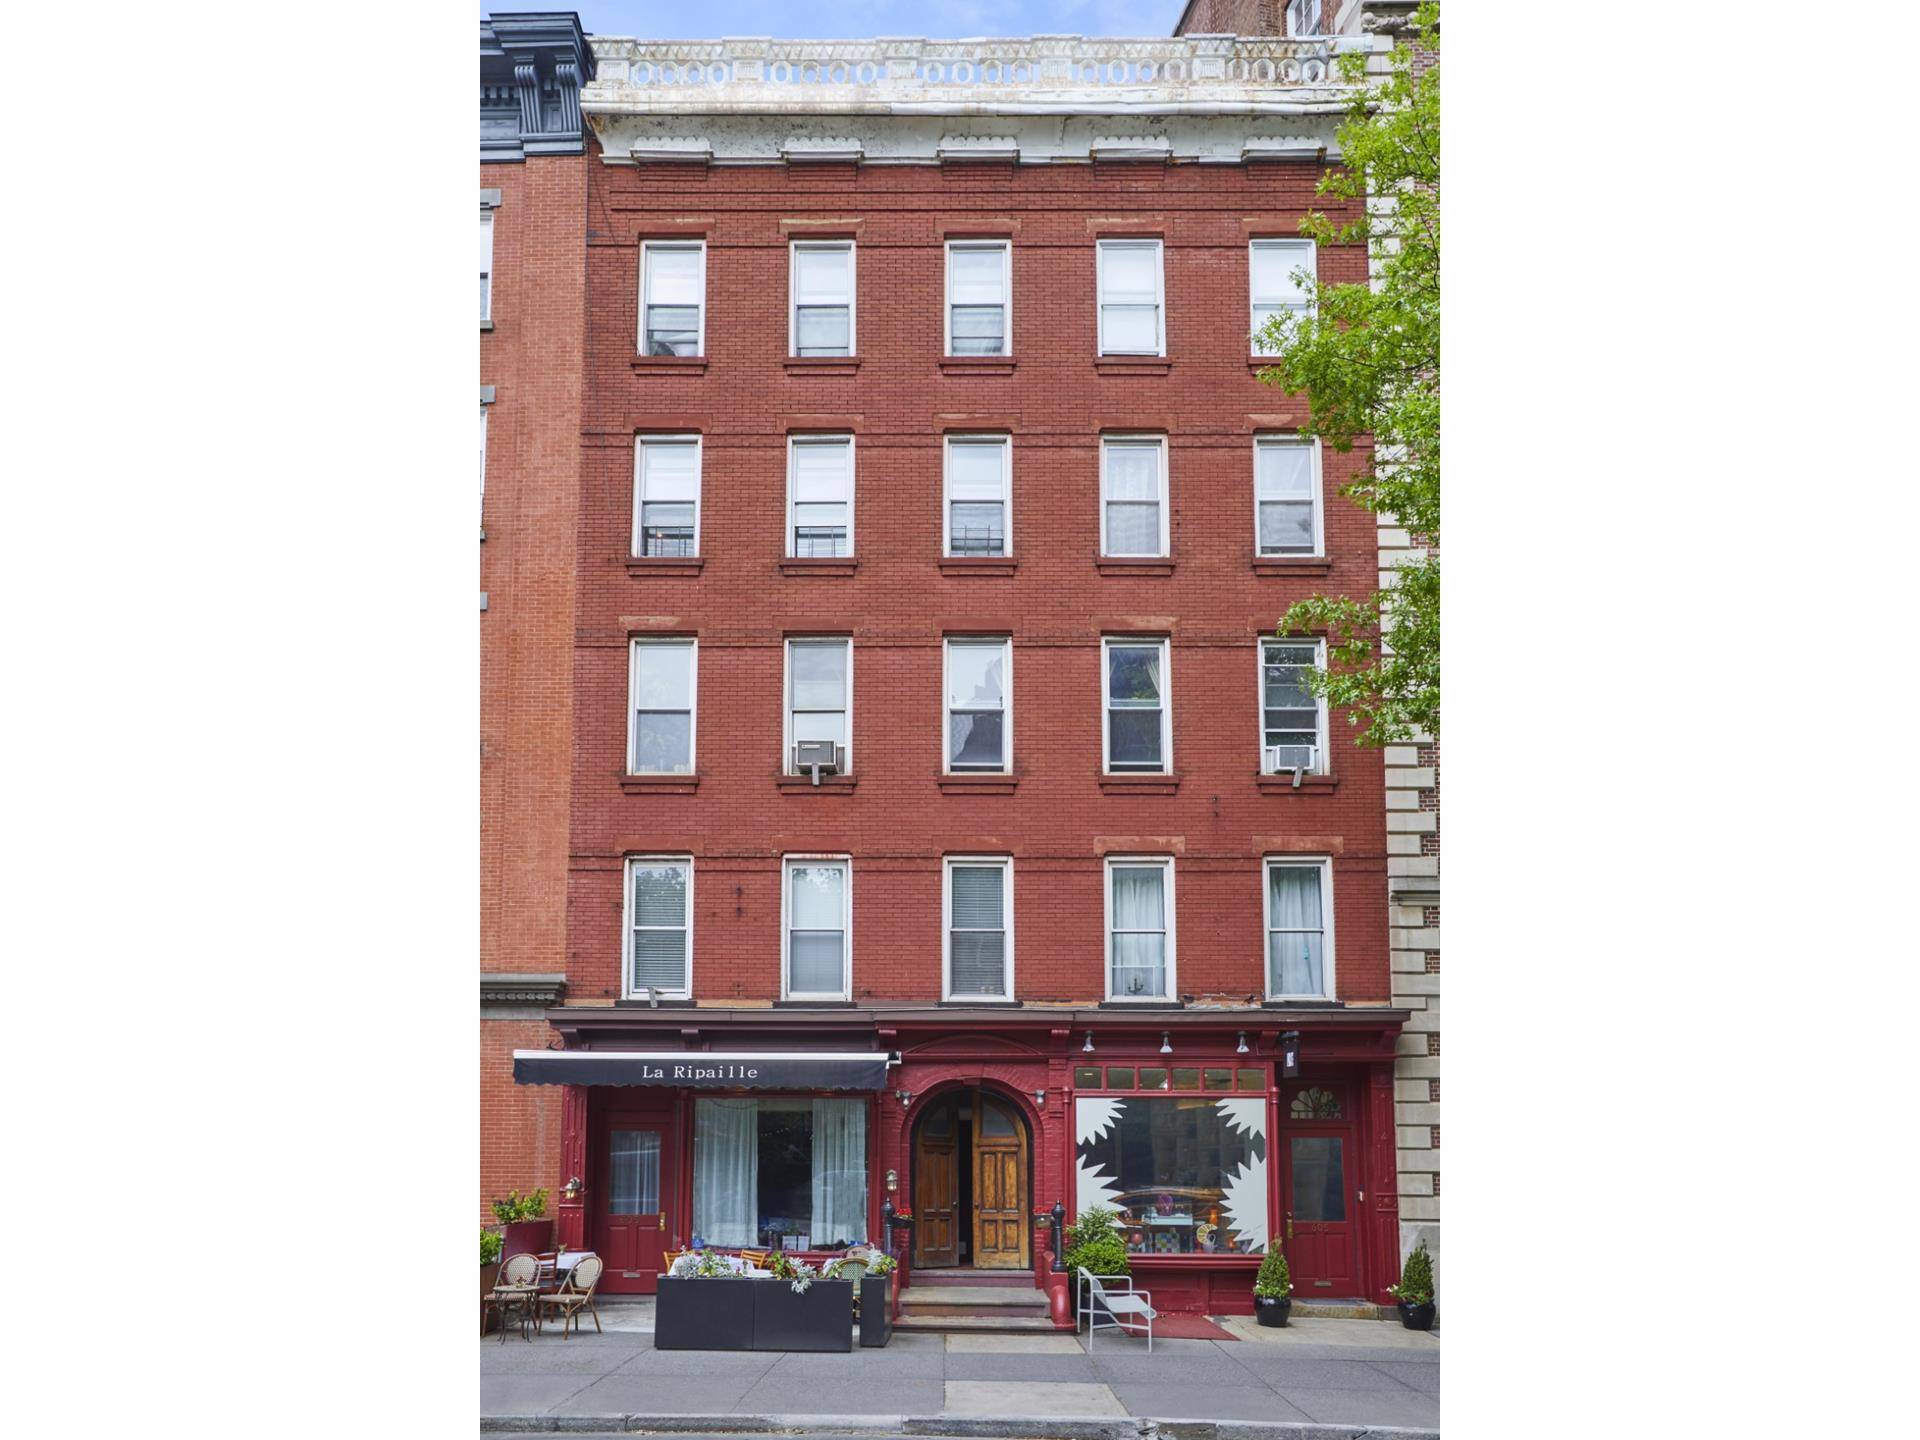 605 Hudson Street, is a 10, 124 square foot gross mixed use building facing Abington Square in the prime West Village neighborhood.